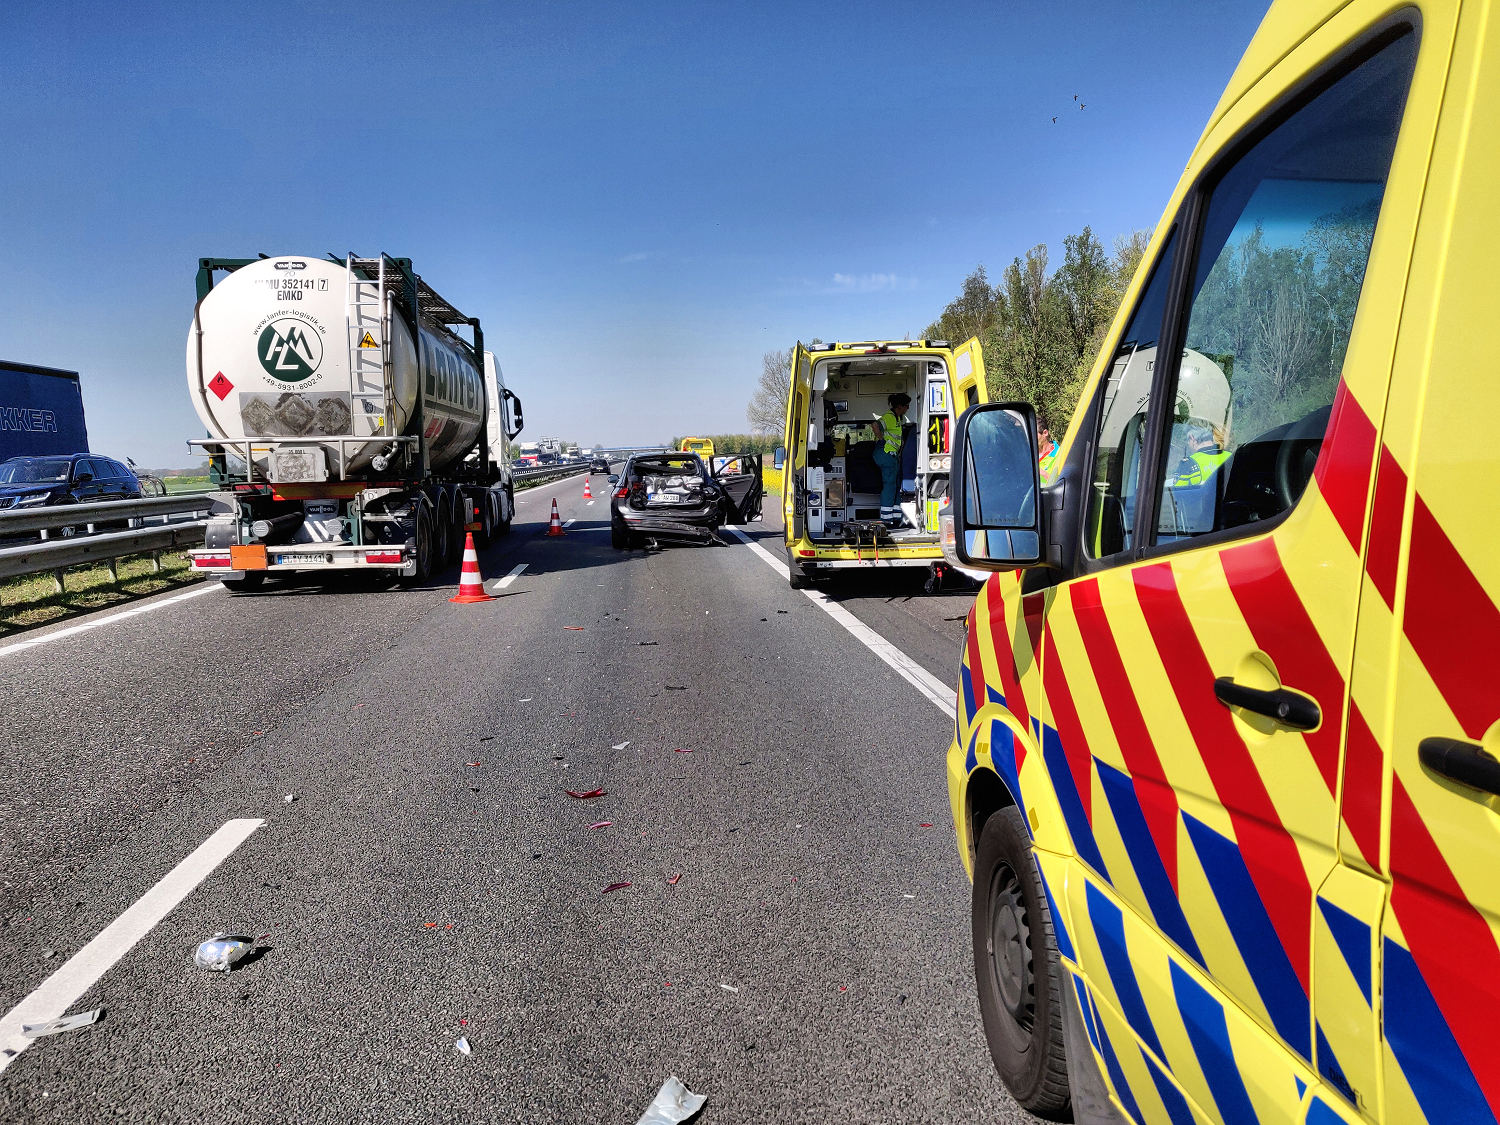 Accident on the A59 motorway at Waspik, on 18 April 2019 (photograph: Marcel van Dorst)